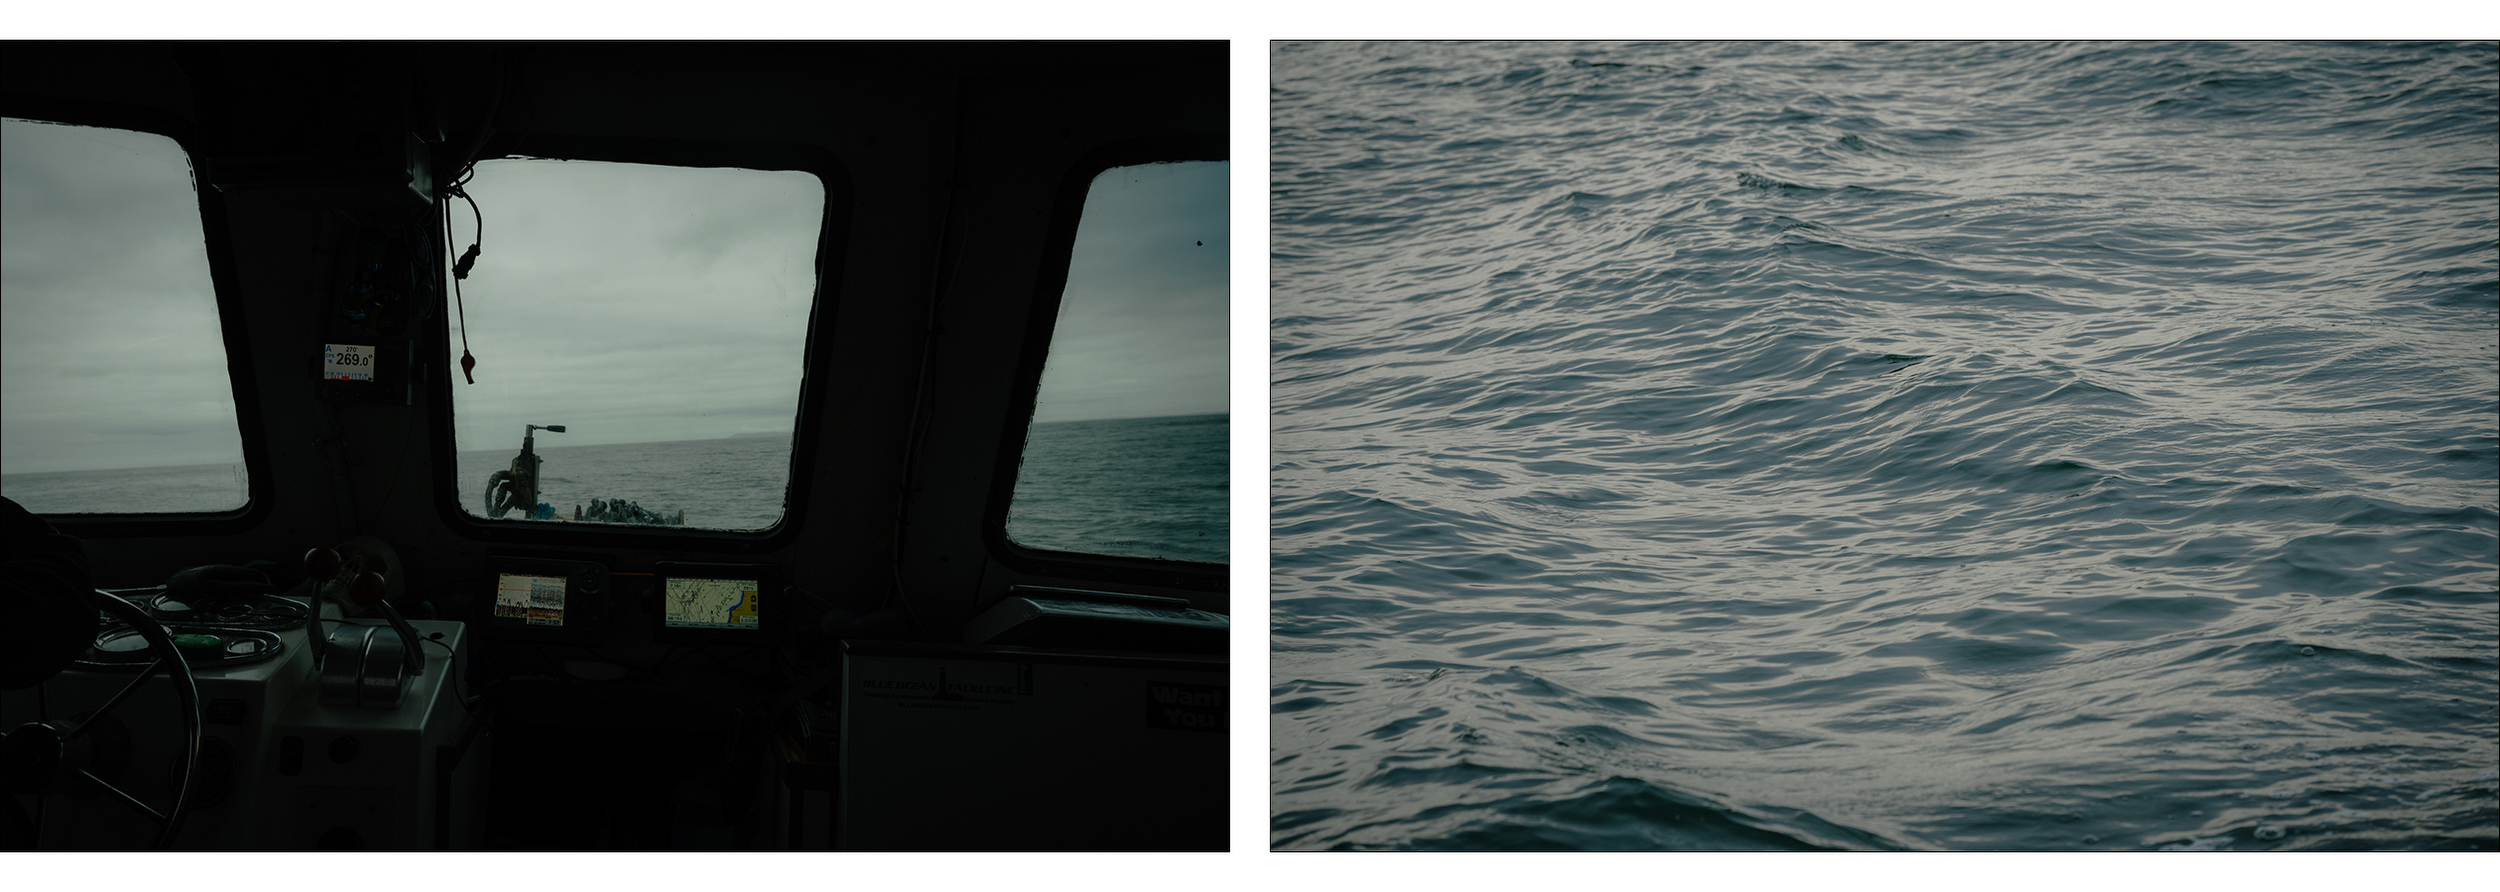 Two photos side-by-side: On the left, a view of the ocean seen through the cabin windows of a boat; on the right, small crests of water on the ocean.